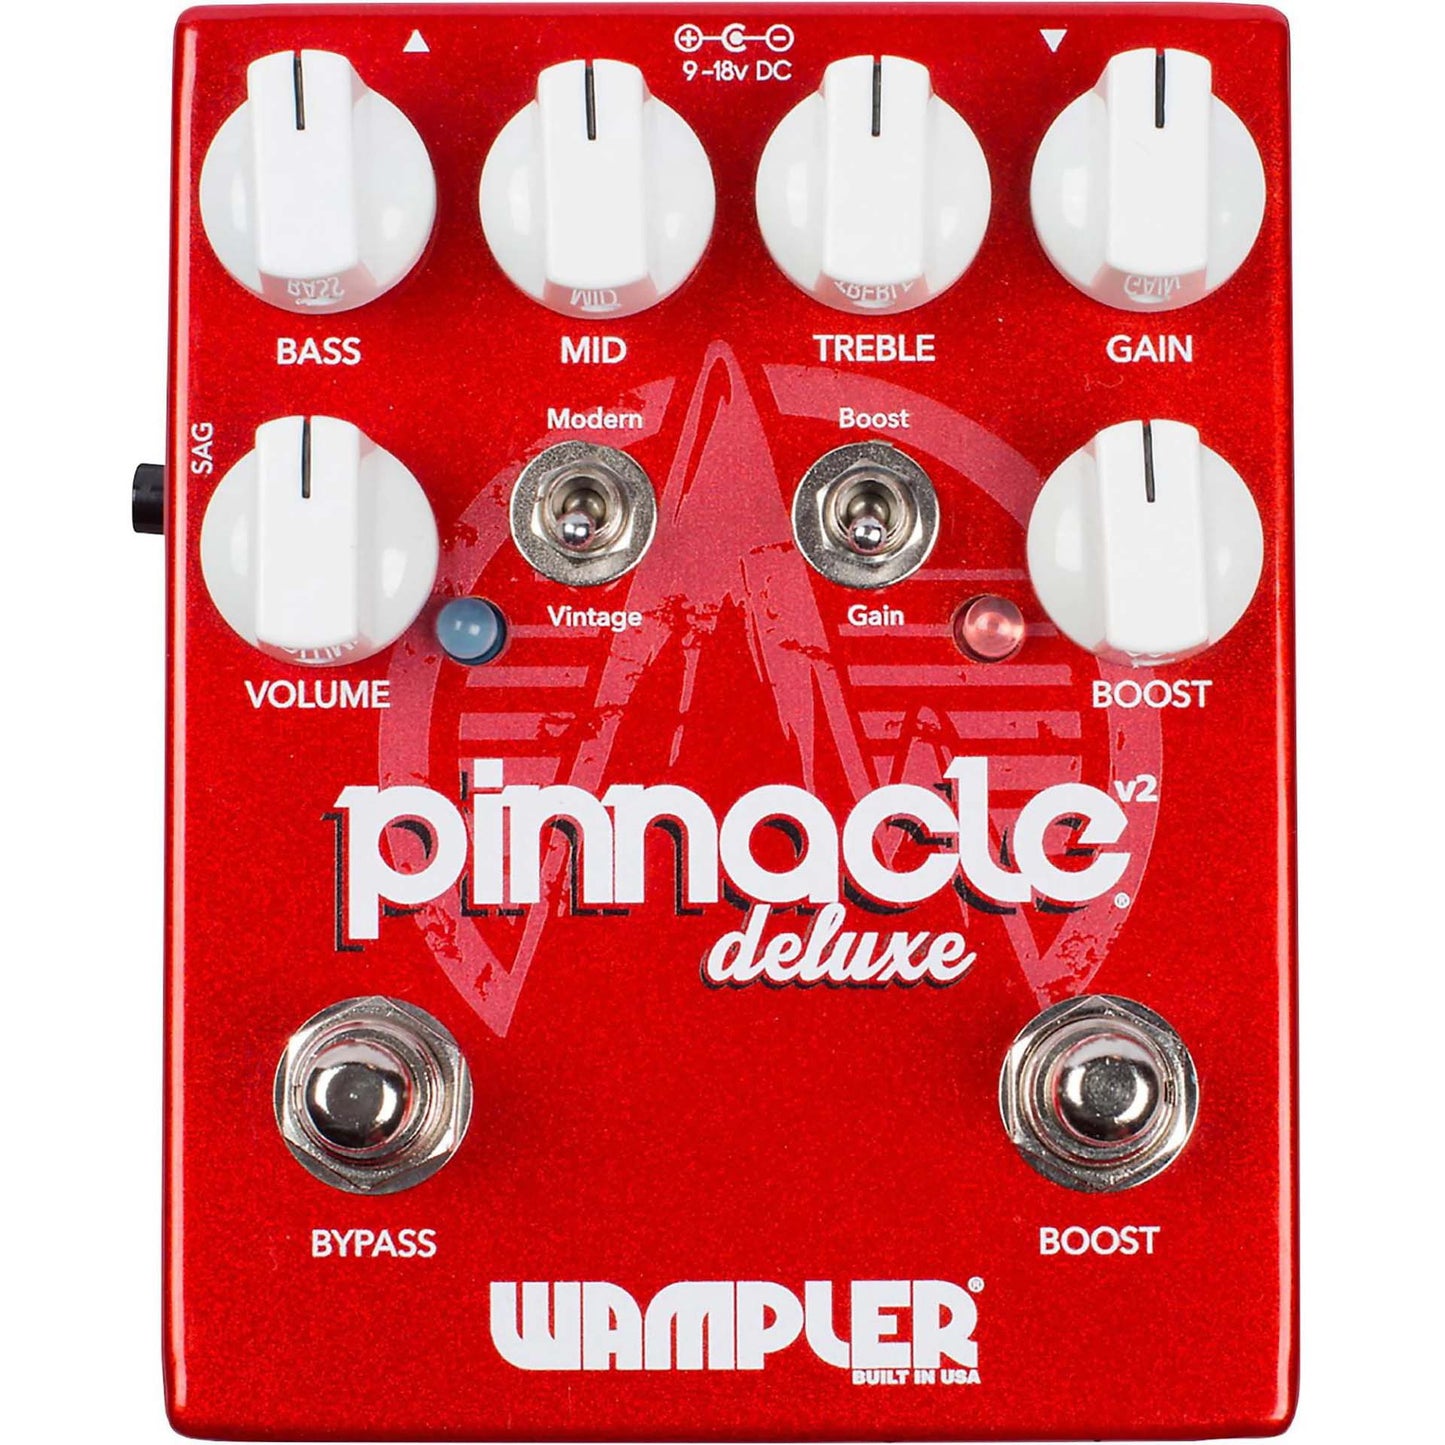 Wampler Pedals Pinnacle Deluxe Distortion Pedal